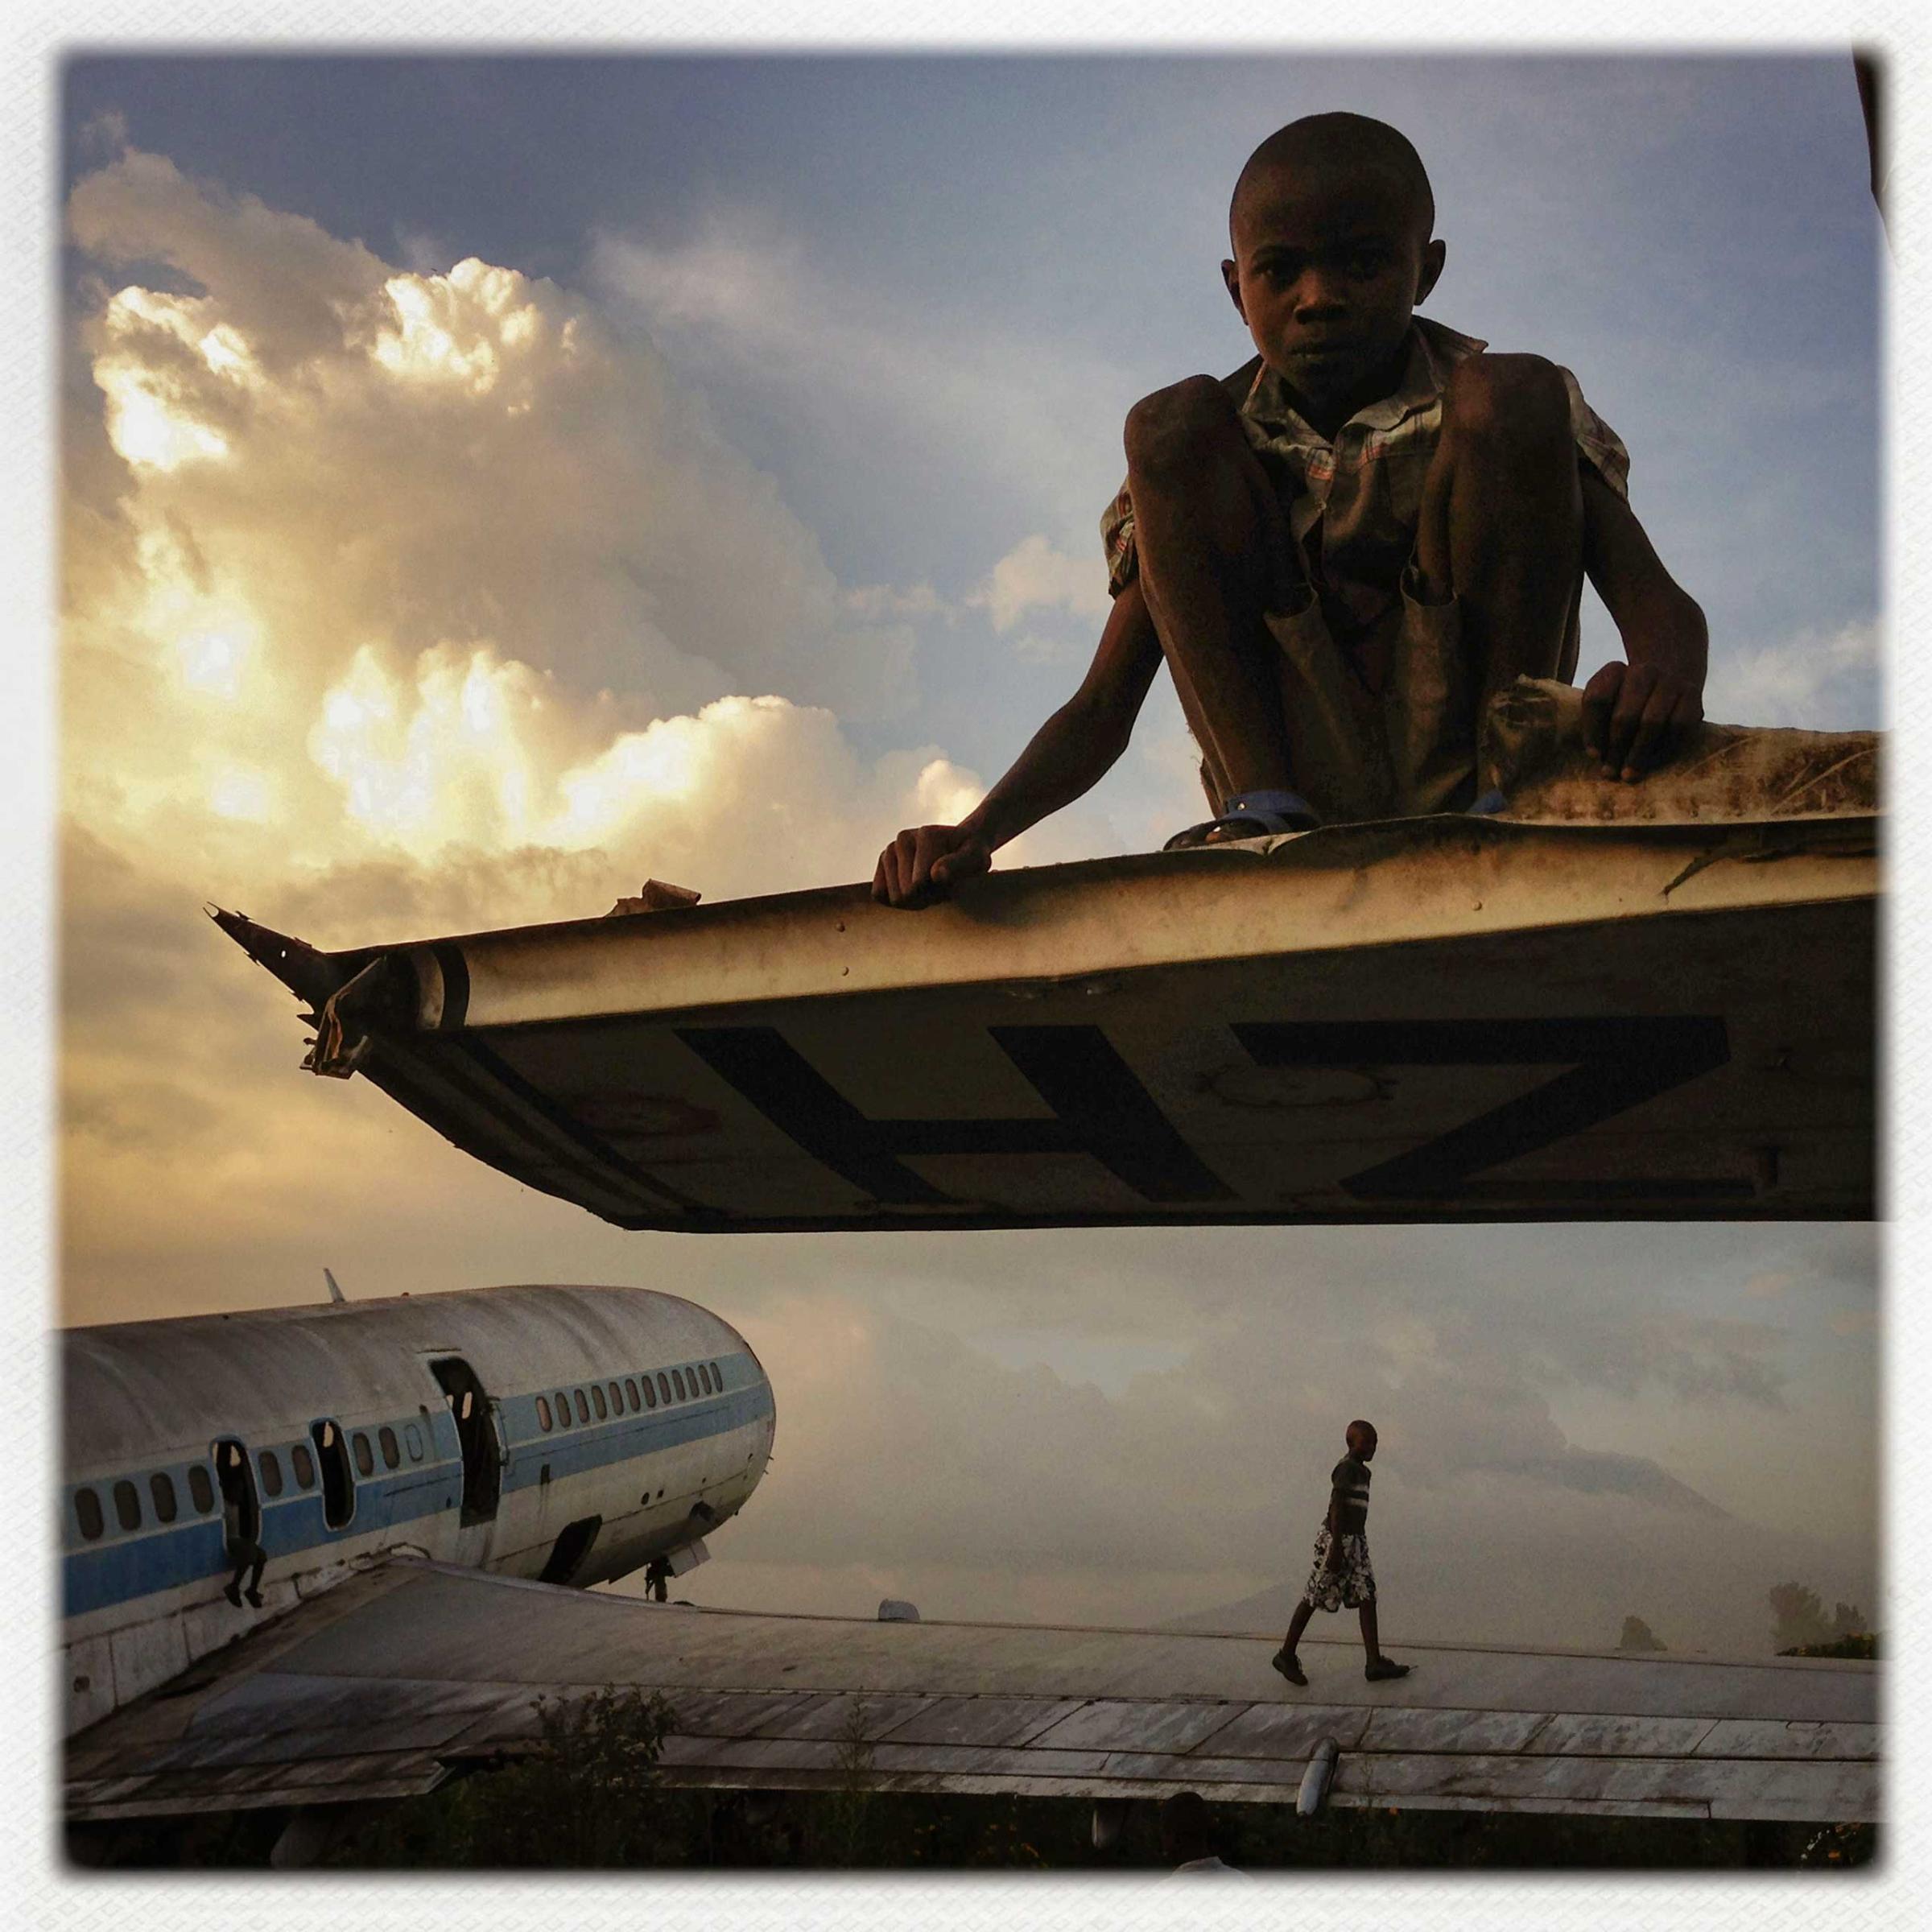 CONGO. Goma. December 14, 2012. Abandoned planes are a common site at airports in Africa. At Goma Airport, in the Democratic Republic of Congo, planes left due to wars and volcanic eruptions over the past two decades have become a playground for street children, some of whom sell the parts which are made into stoves and other items to be sold on the streets of Goma. One is generally prohibited from photographing this airport but in mid-December, 2012, after the M23 rebel force which occupied Goma left and before the FARDC (military of the D.R.C.) returned to the city, a security vacuum meant that nobody was guarding this section of the airport. Children guided me through the planes, which were later discussed by my Congolese fixer:‚ÄúIn January of 2002, the volcano (Nyiragongo, just outside Goma) exploded and the lava blocked the planes. I helped move this plane after I and many of my friends living near the airport lost our homes to lava, on the first day of the eruption. On the second day, we saw the lava moving towards the planes. I and others were just watching the lava flow getting closer to the planes and we decided to move one of them, this newer one. There were at least a hundred people there pushing the plane for about 300 meters. A friend mine, who was there and whose house was also destroyed, had a childhood dream to be a pilot. But his parents were too poor and all the schools were expensive, so he could not hold onto that dream. He forgot about it, but then on that day, when we needed to move the plane, he told me to help him inside so he might steer it! We all pushed the plane as my friend waved his arm out the window, in the cockpit. We then climbed in the plane and saw the lava flowing down the volcano and into town.‚Äù